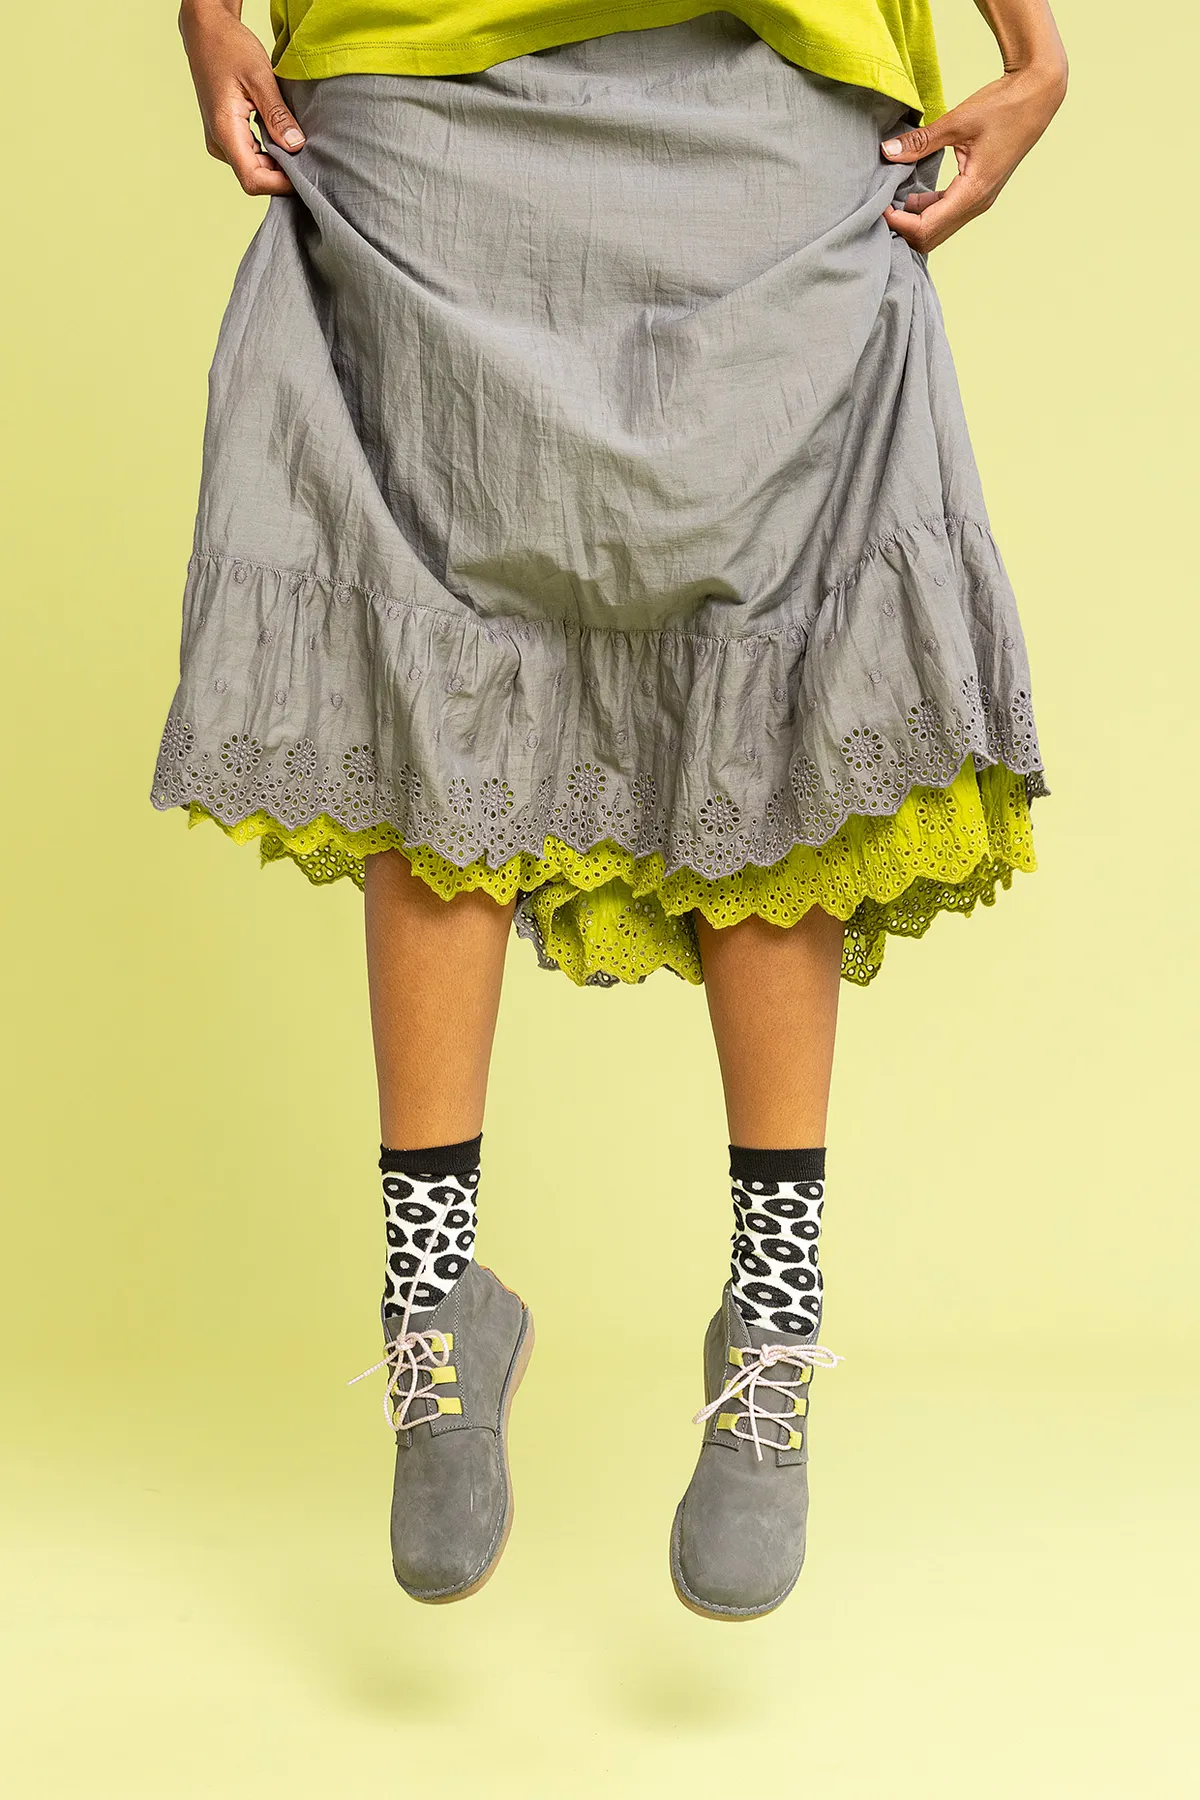 Gudrun Sjoden Spring 2024 collection underskirts